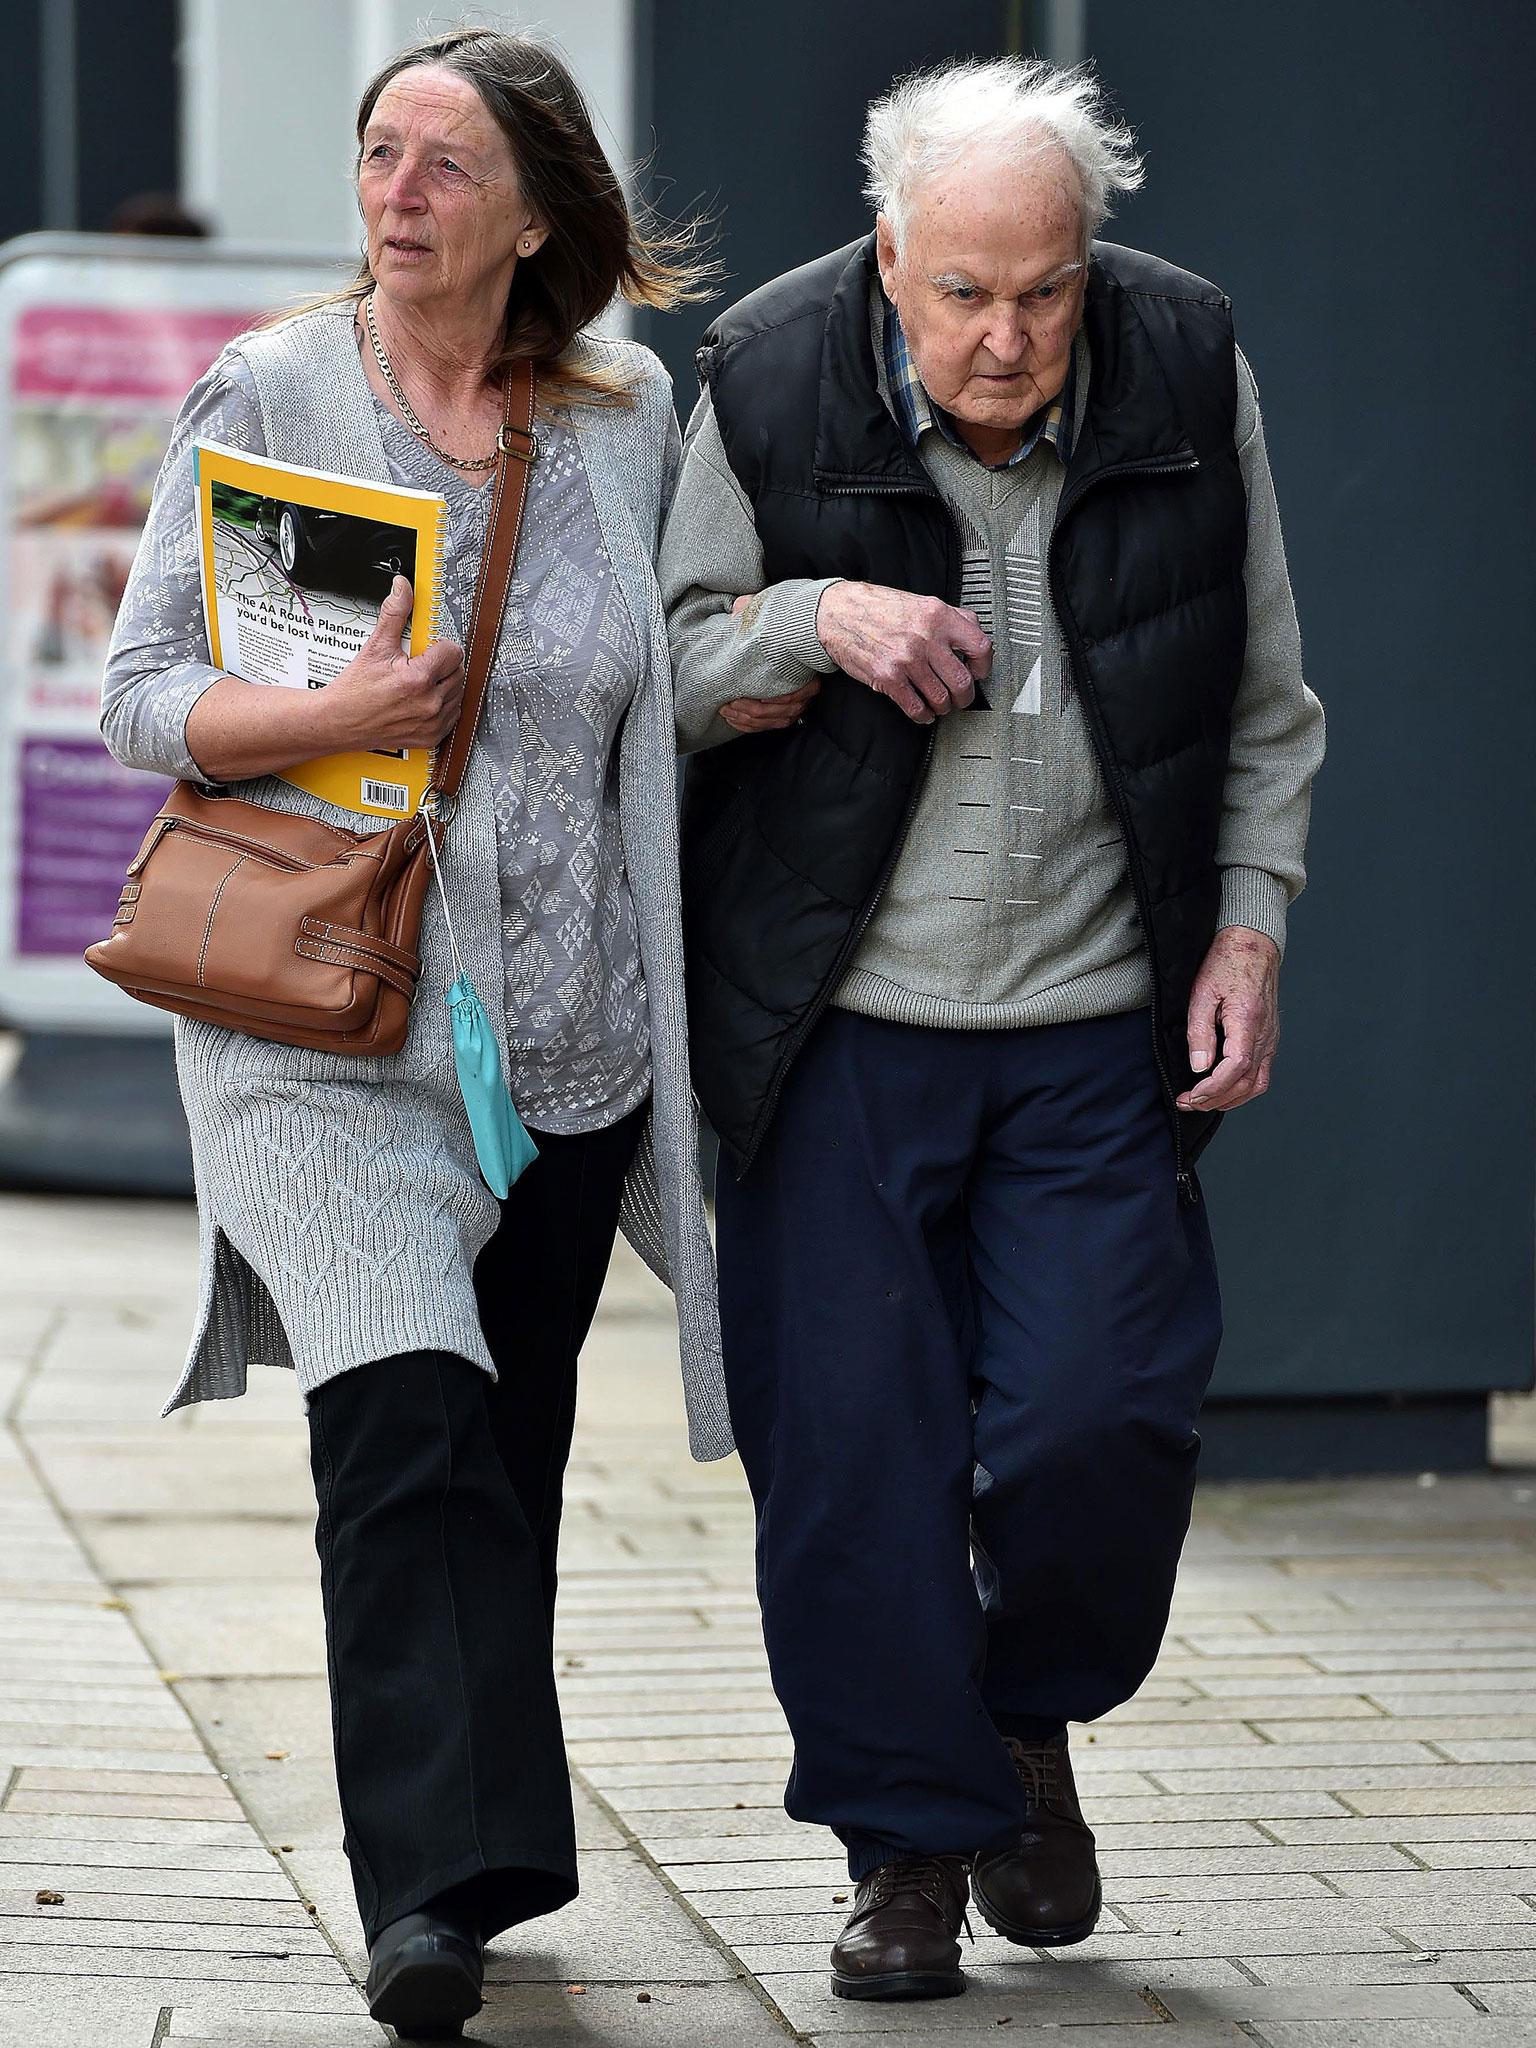 Denver Beddows leaves Liverpool Crown Court with an unidentified woman